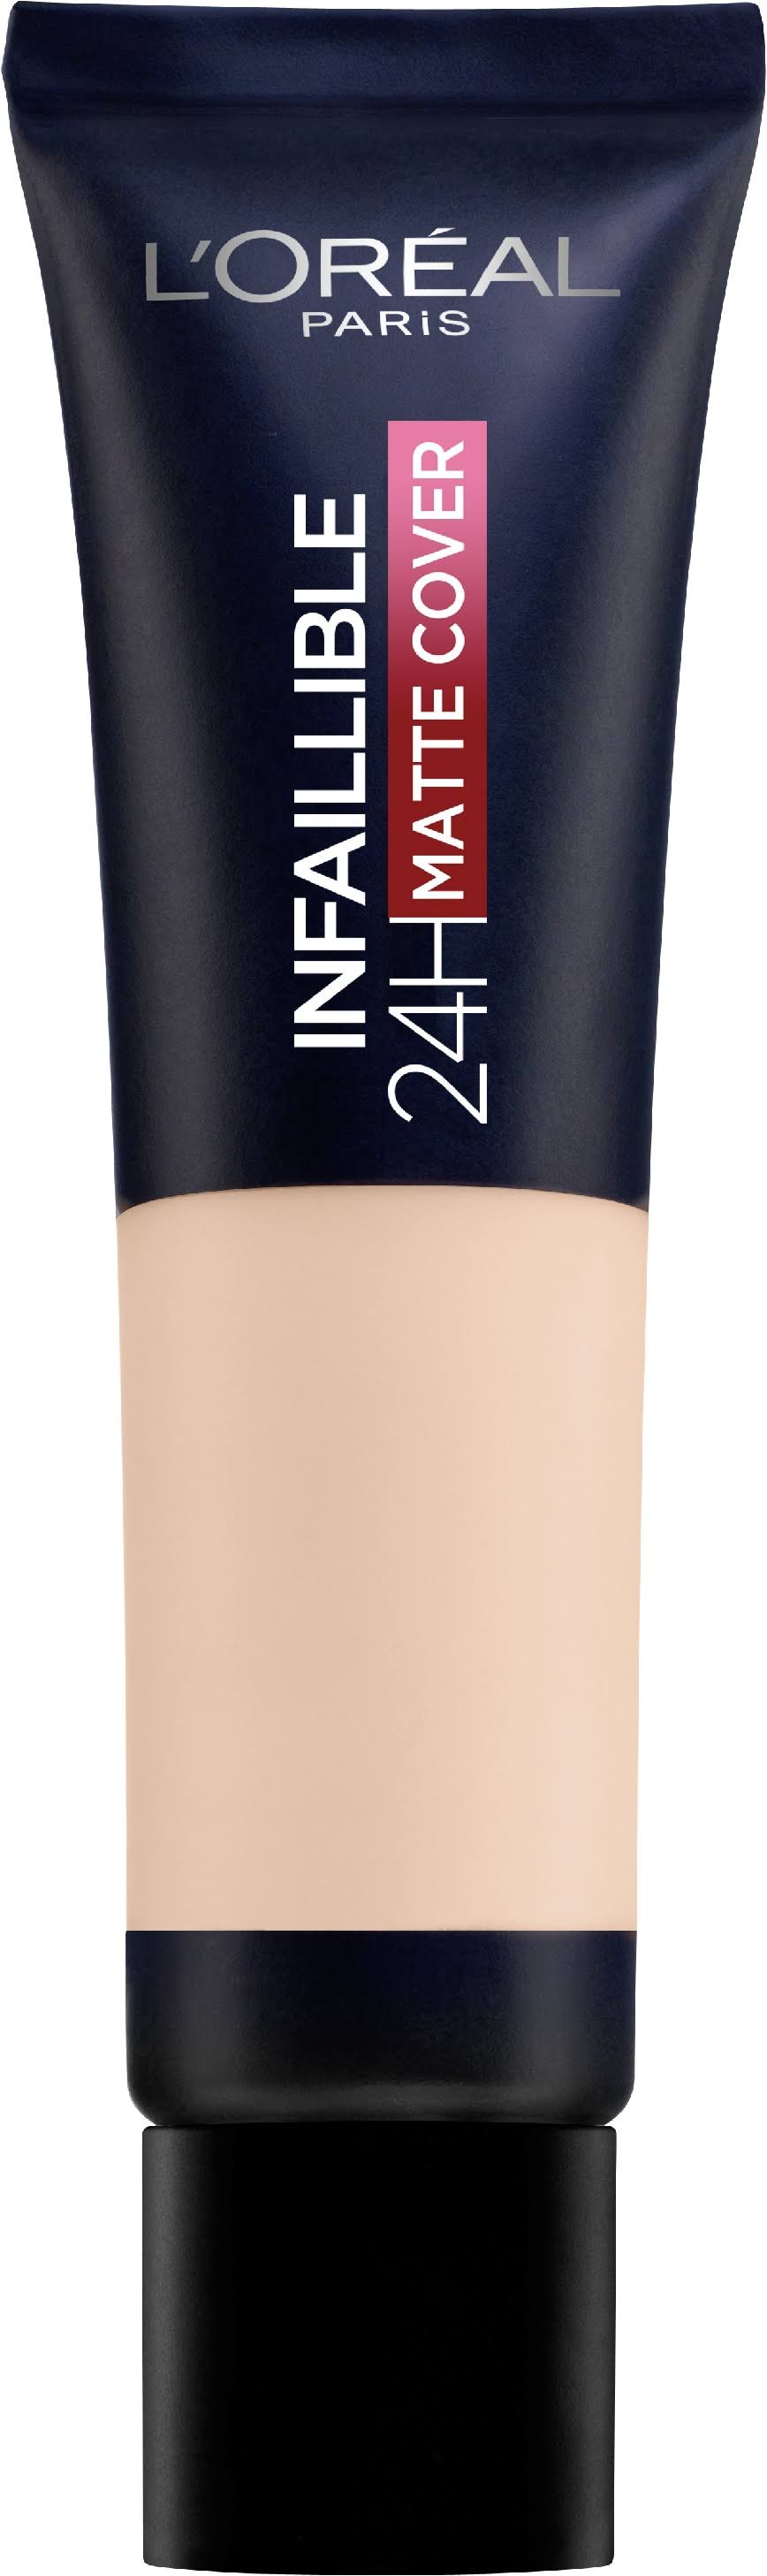 L'Oreal Infallible 24H Foundation Matte Cover 30ml Natural Rose 155